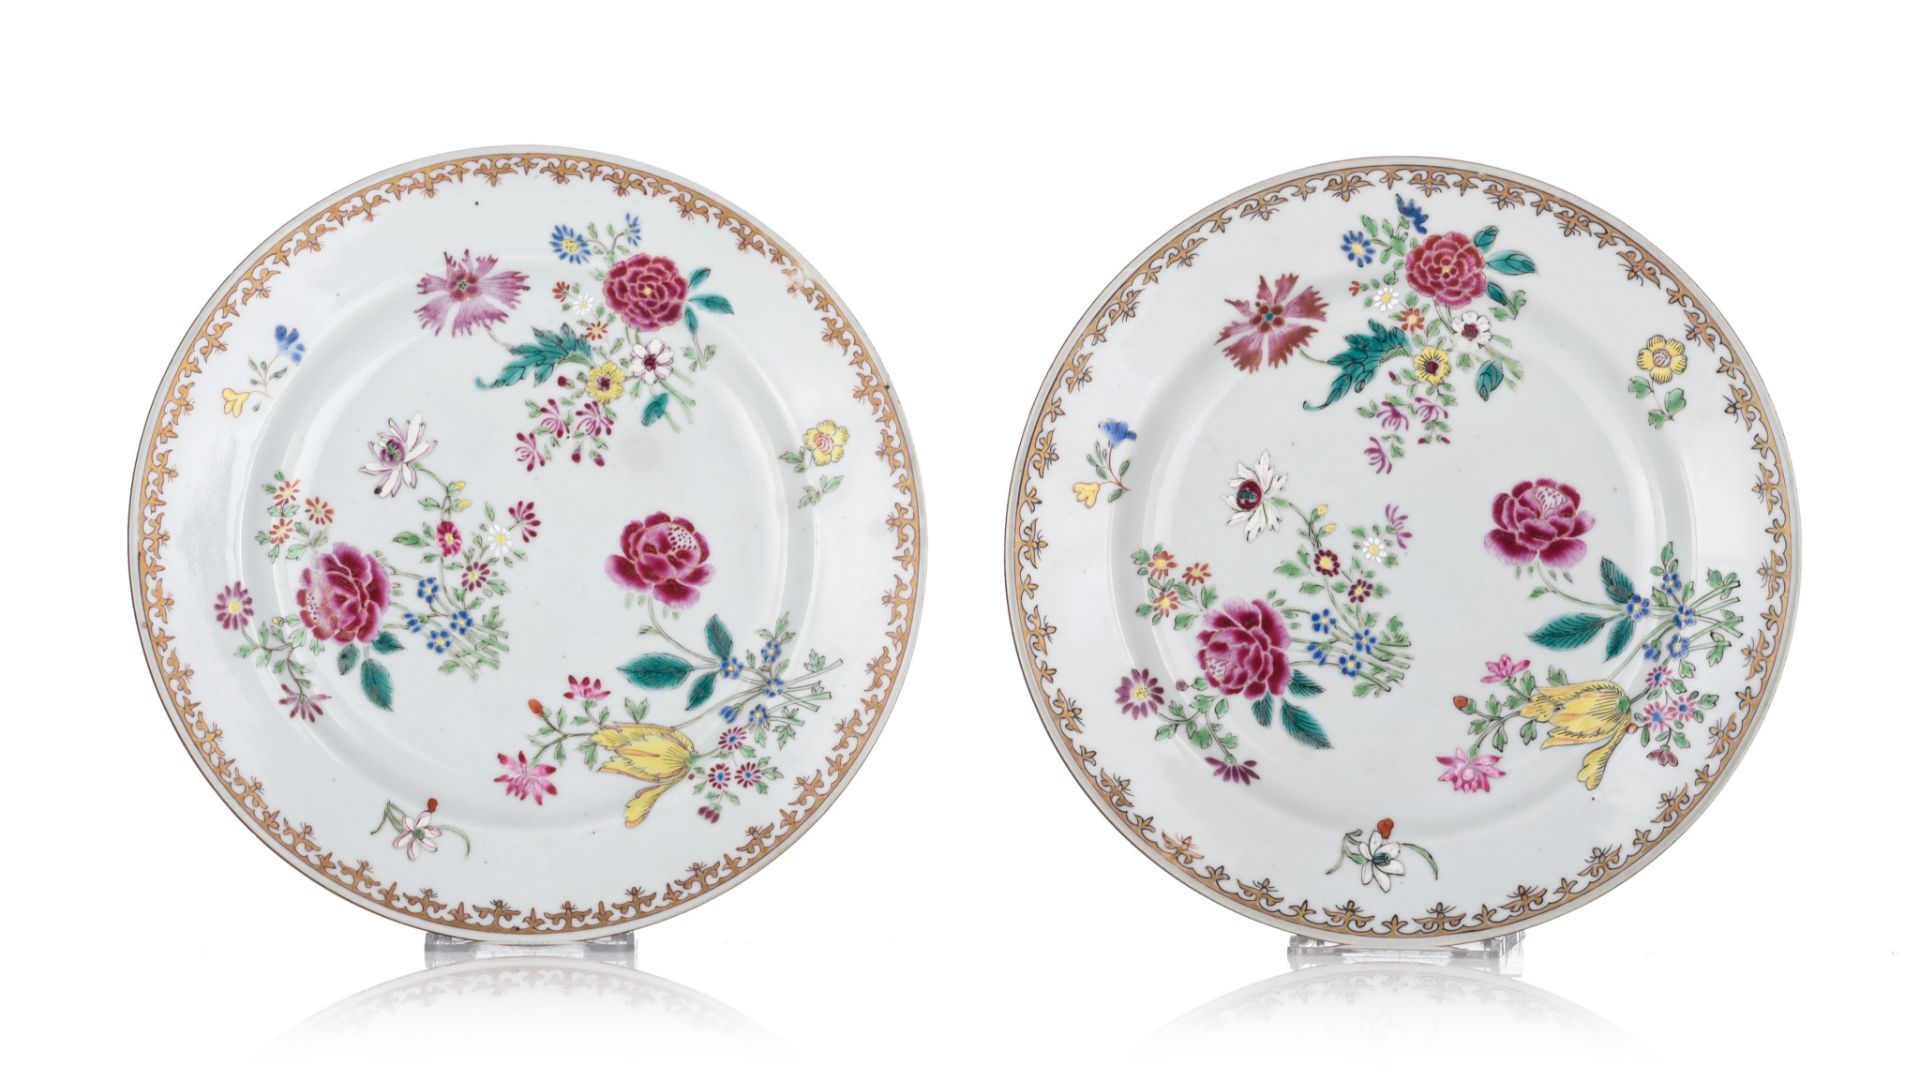 A collection of six Chinese famille rose export porcelain plates, 18thC, ¯ 23,5 cm - Image 5 of 10